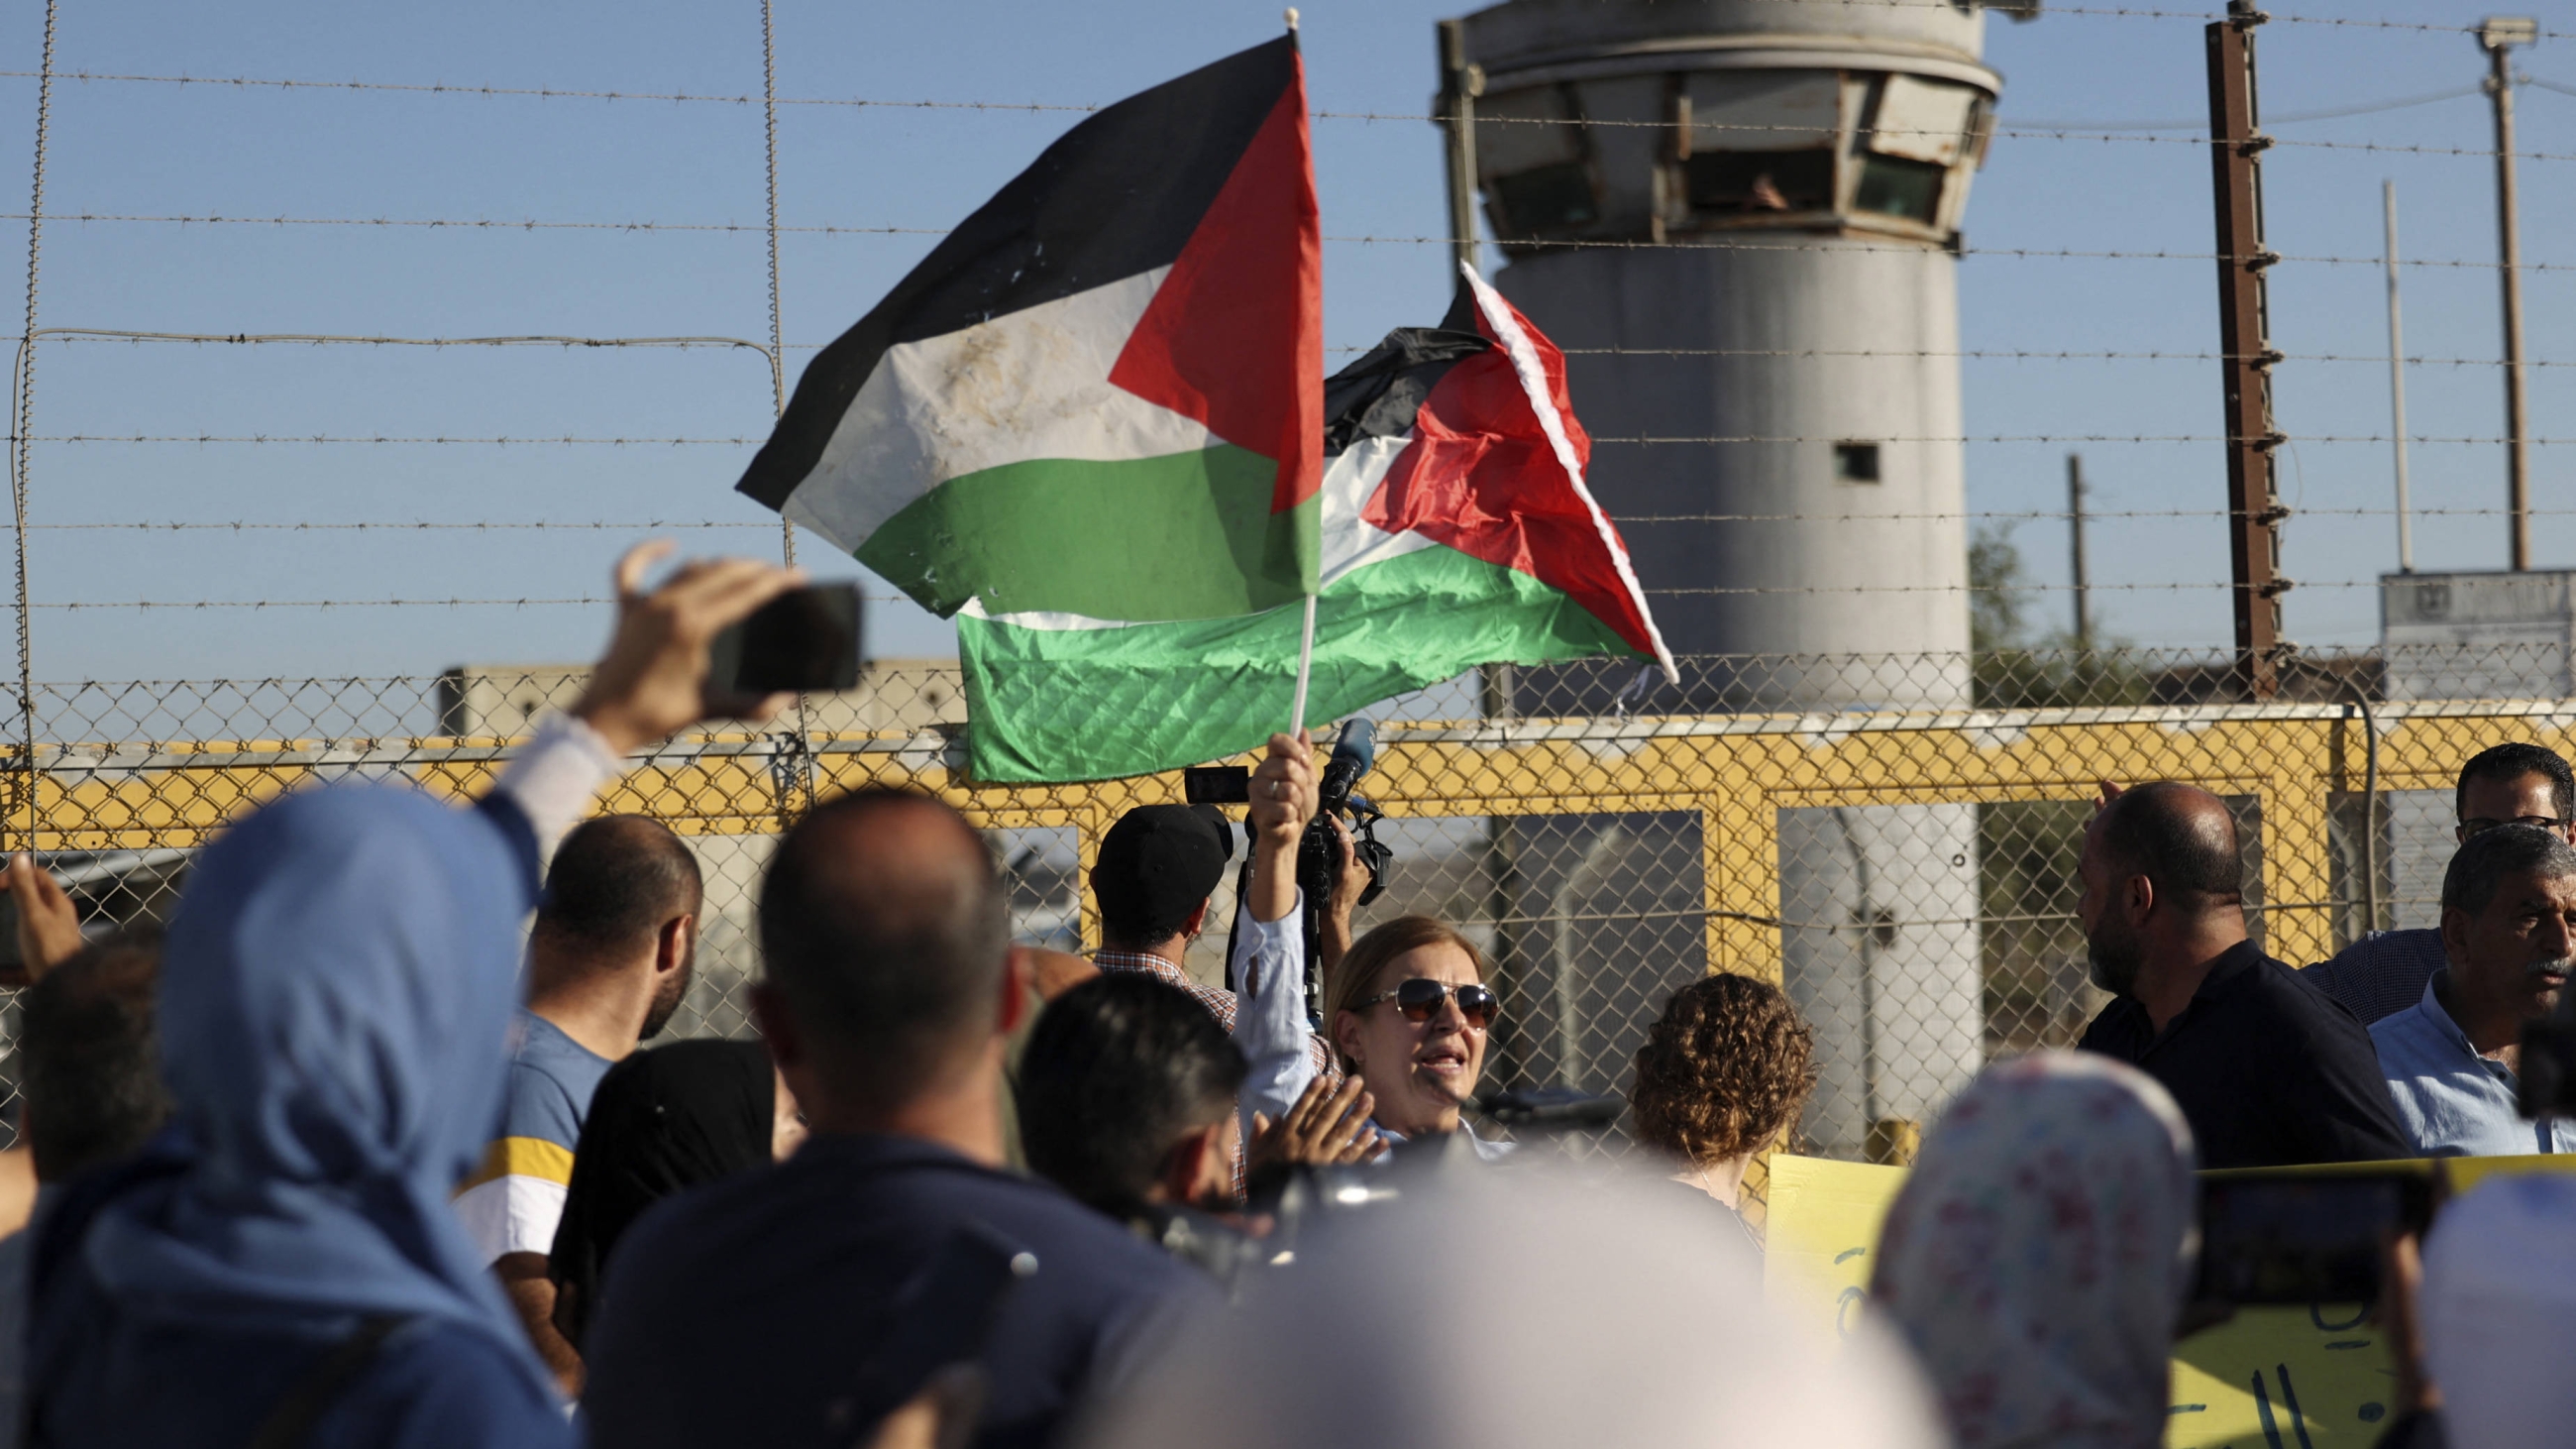 Palestinians demonstrate in front of the Israeli Ofer prison near the city of Ramallah in the occupied West Bank, on 12 July 2021 (AFP)